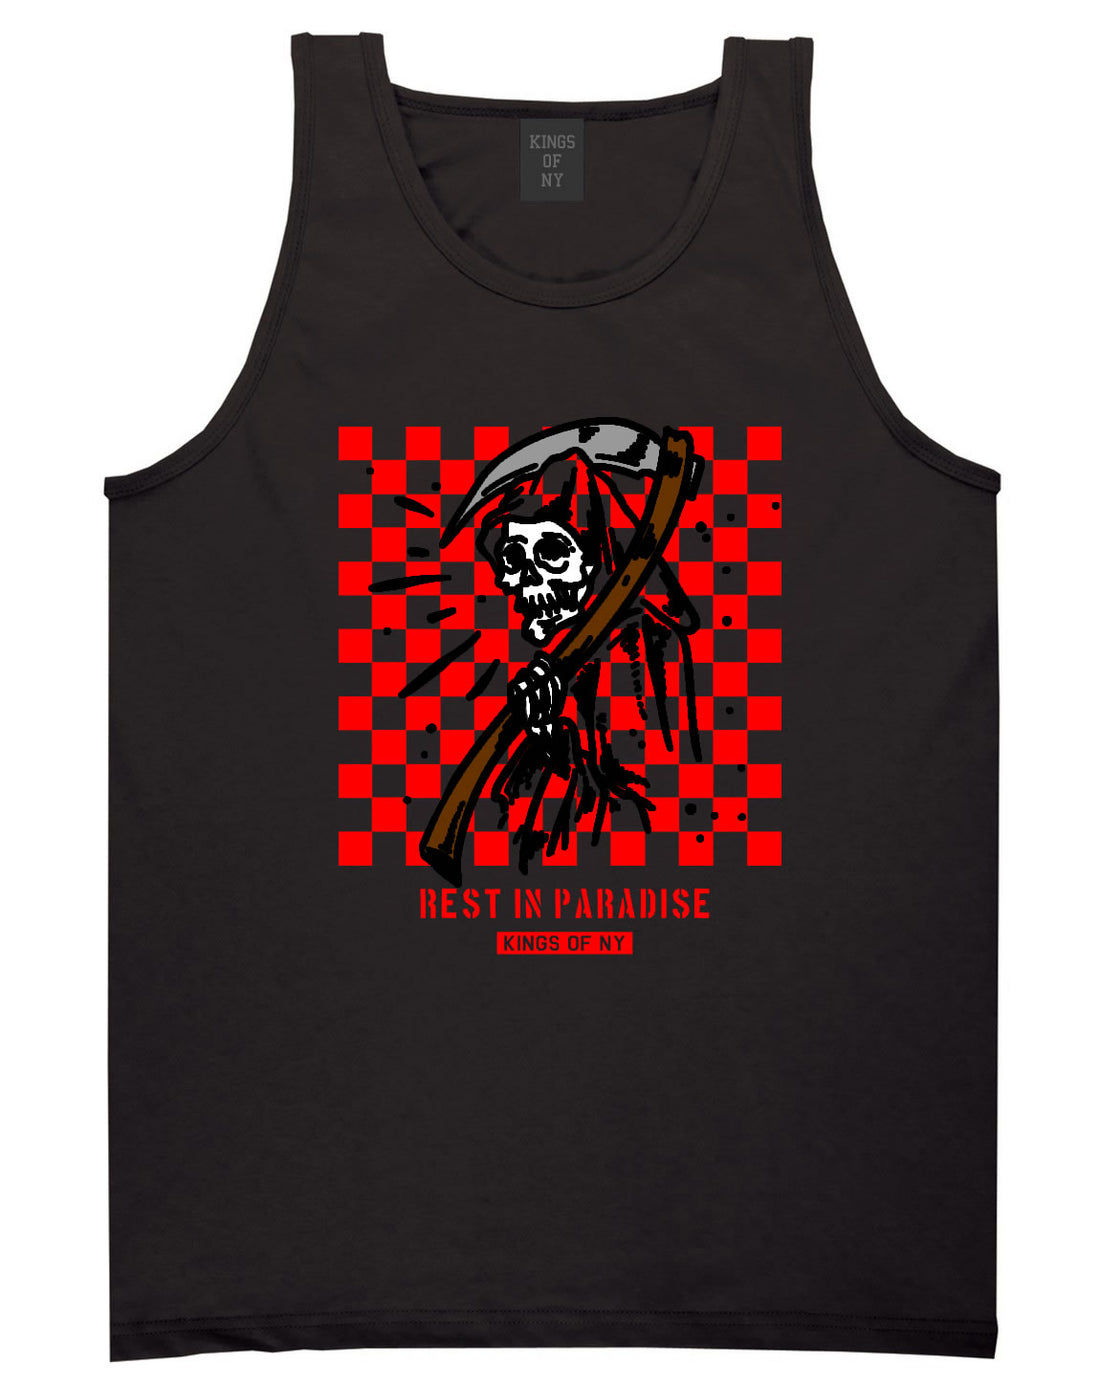 Rest In Paradise Grim Reaper Mens Tank Top Shirt Black By Kings Of NY